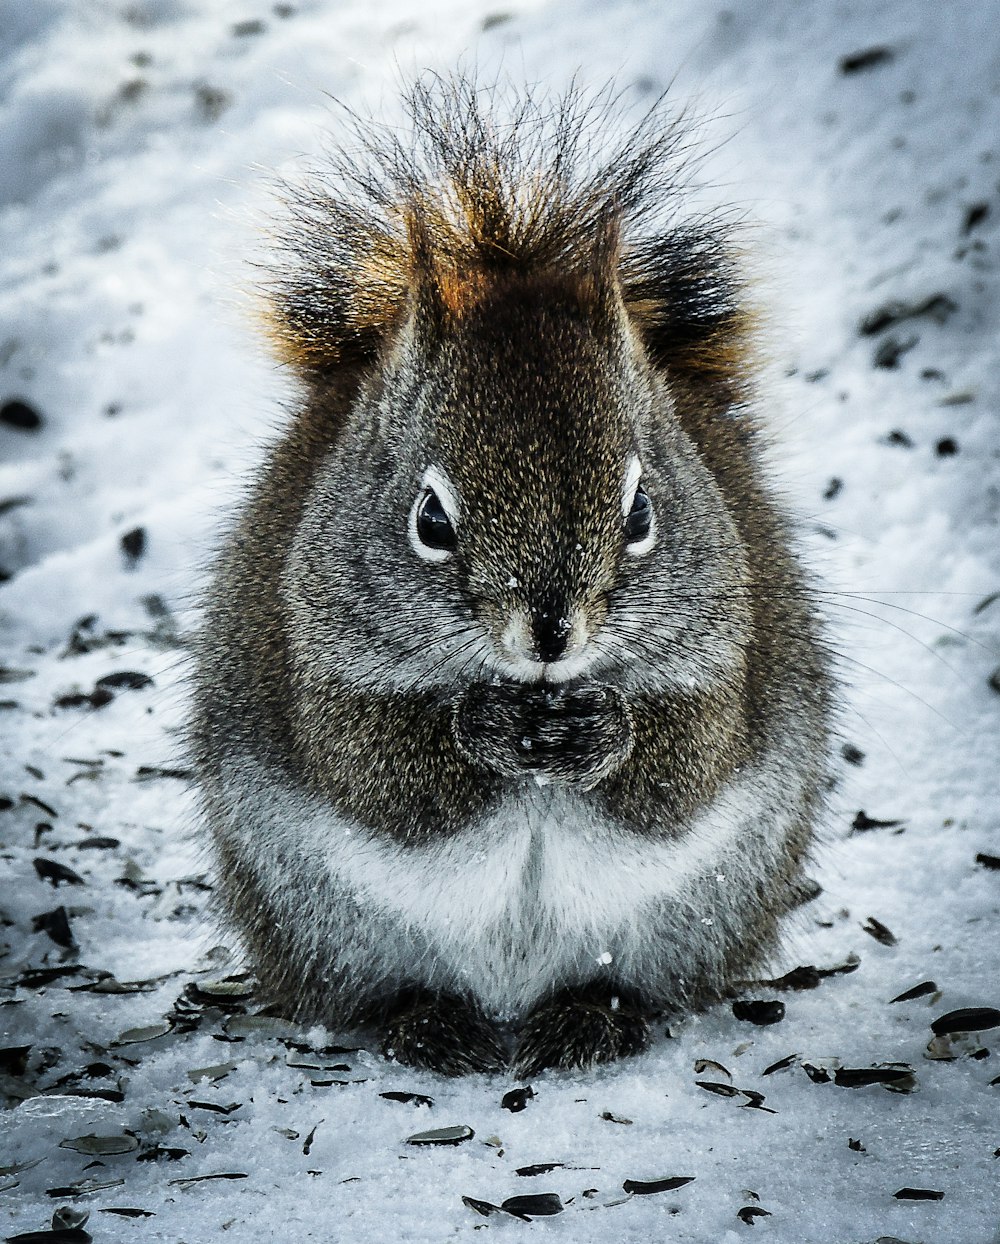 a close up of a squirrel in the snow